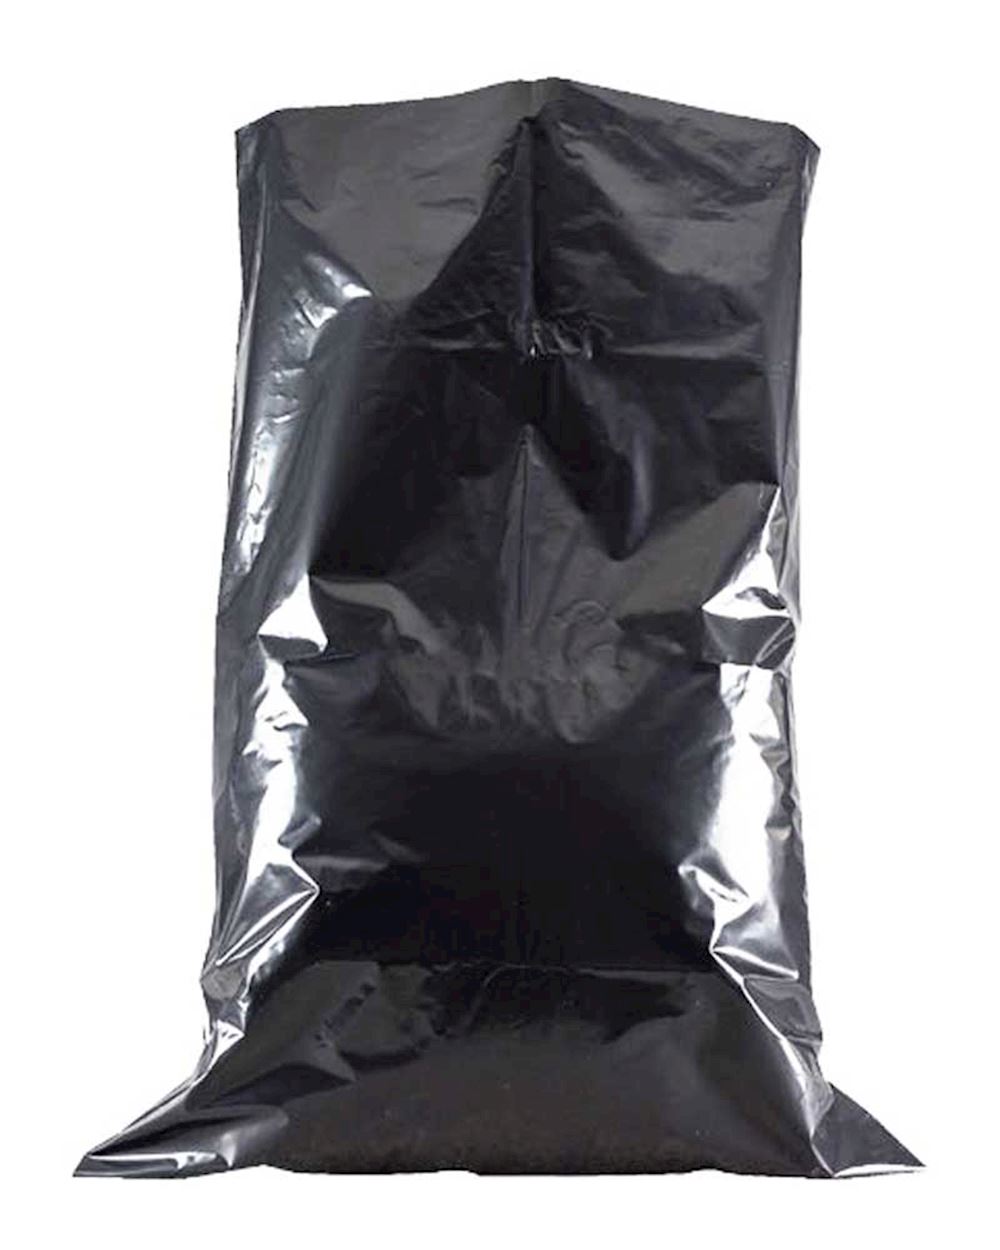 THICK 100 HEAVY DUTY BLACK REFUSE SACKS BIN LINERS STRONG RUBBISH BAGS 